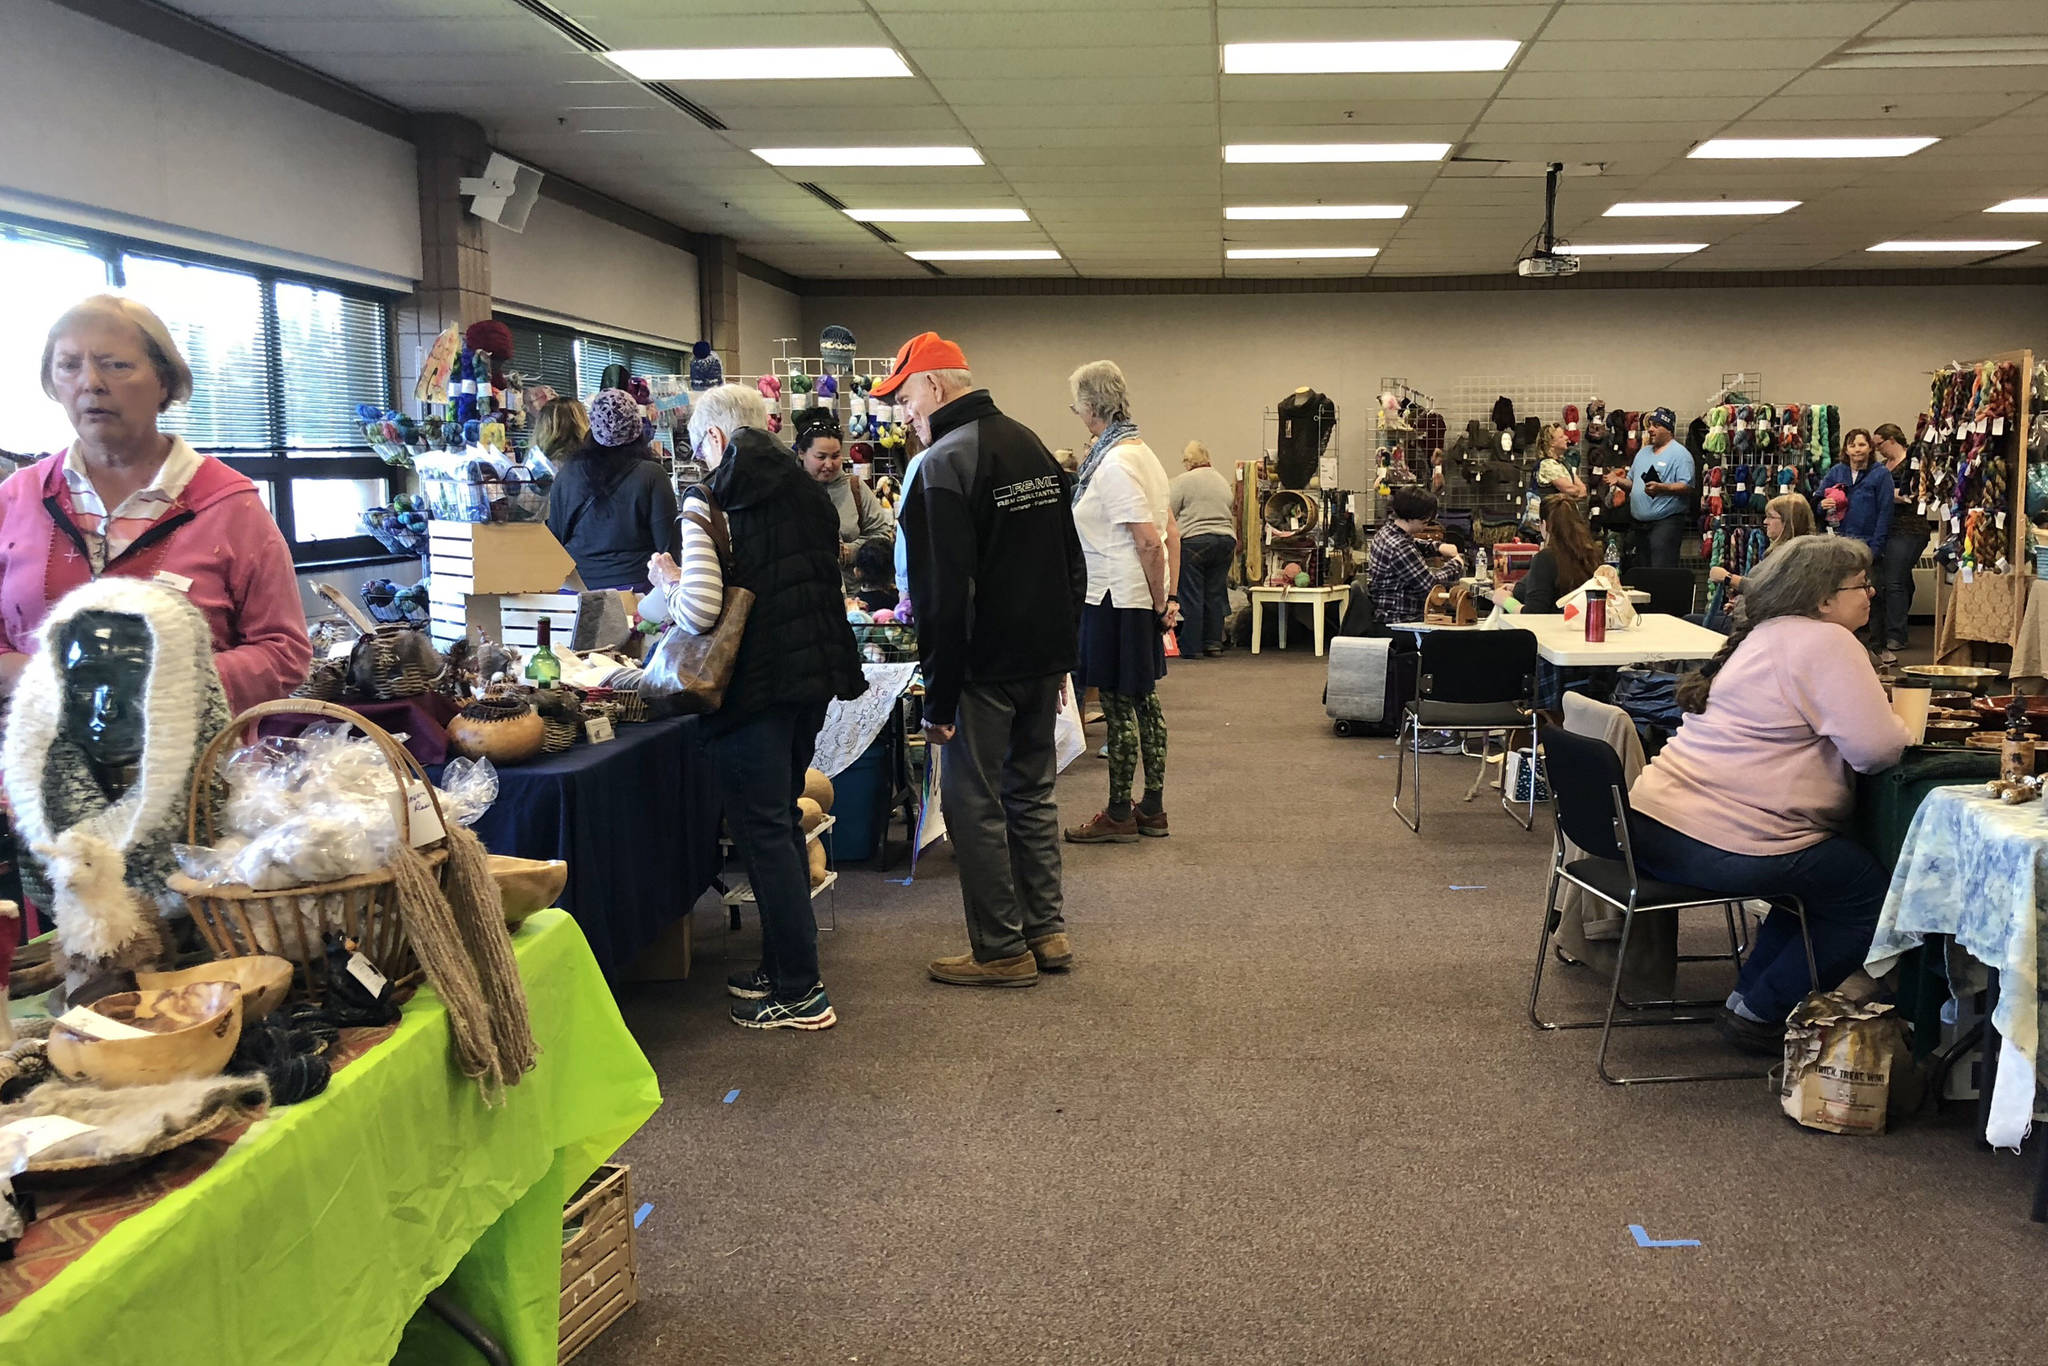 Vendors sell their fiber-made products at the Fireweed Fiberfest on Saturday, Sept. 29, 2018, in Soldotna, Alaska. (Photo by Victoria Petersen/Peninsula Clarion)